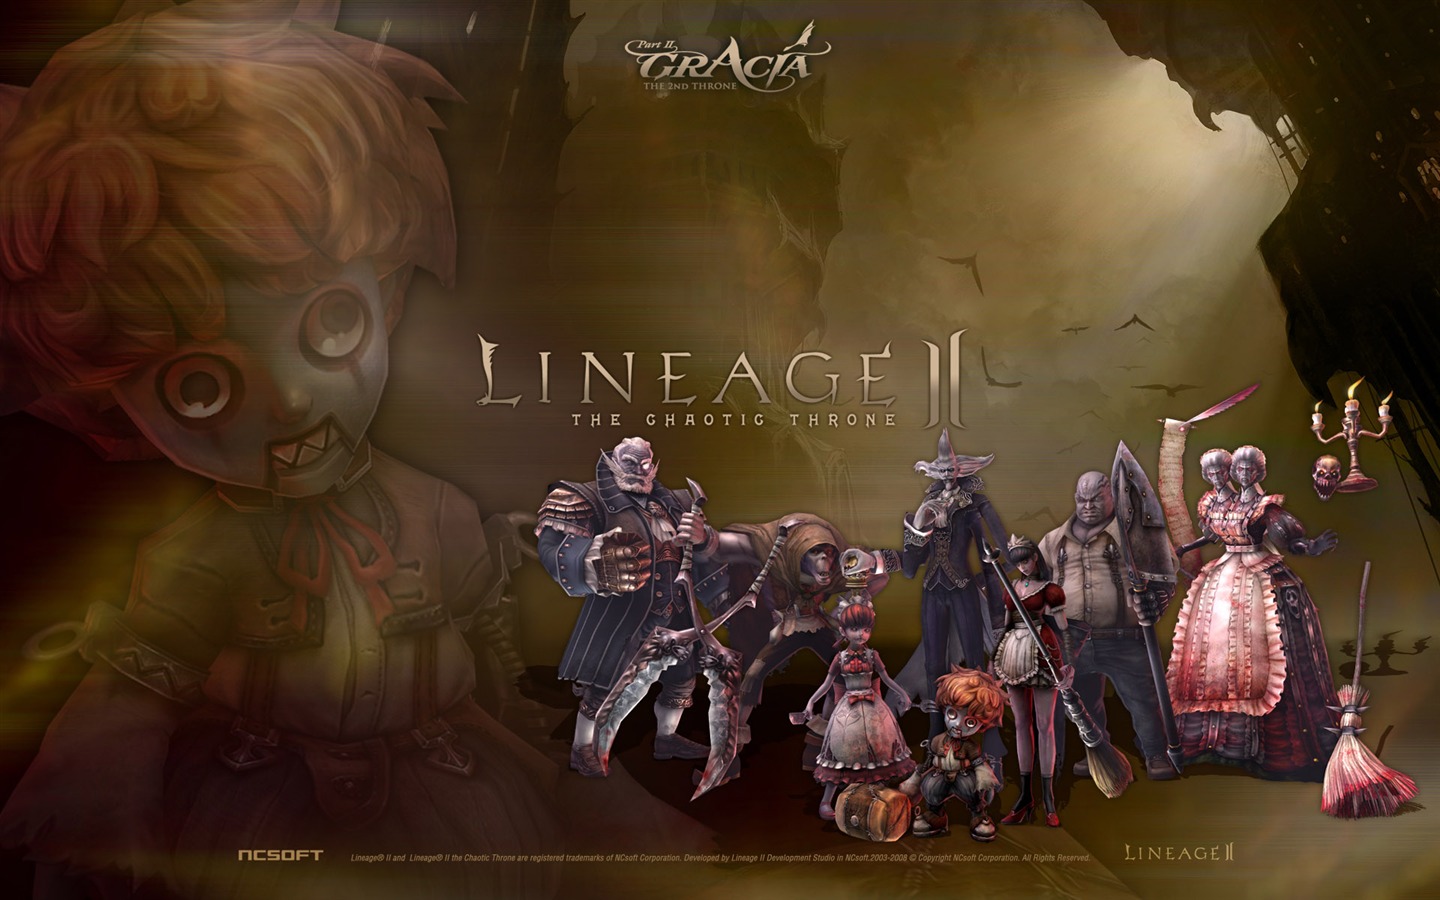 LINEAGE Ⅱ Modellierung HD-Gaming-Wallpaper #20 - 1440x900